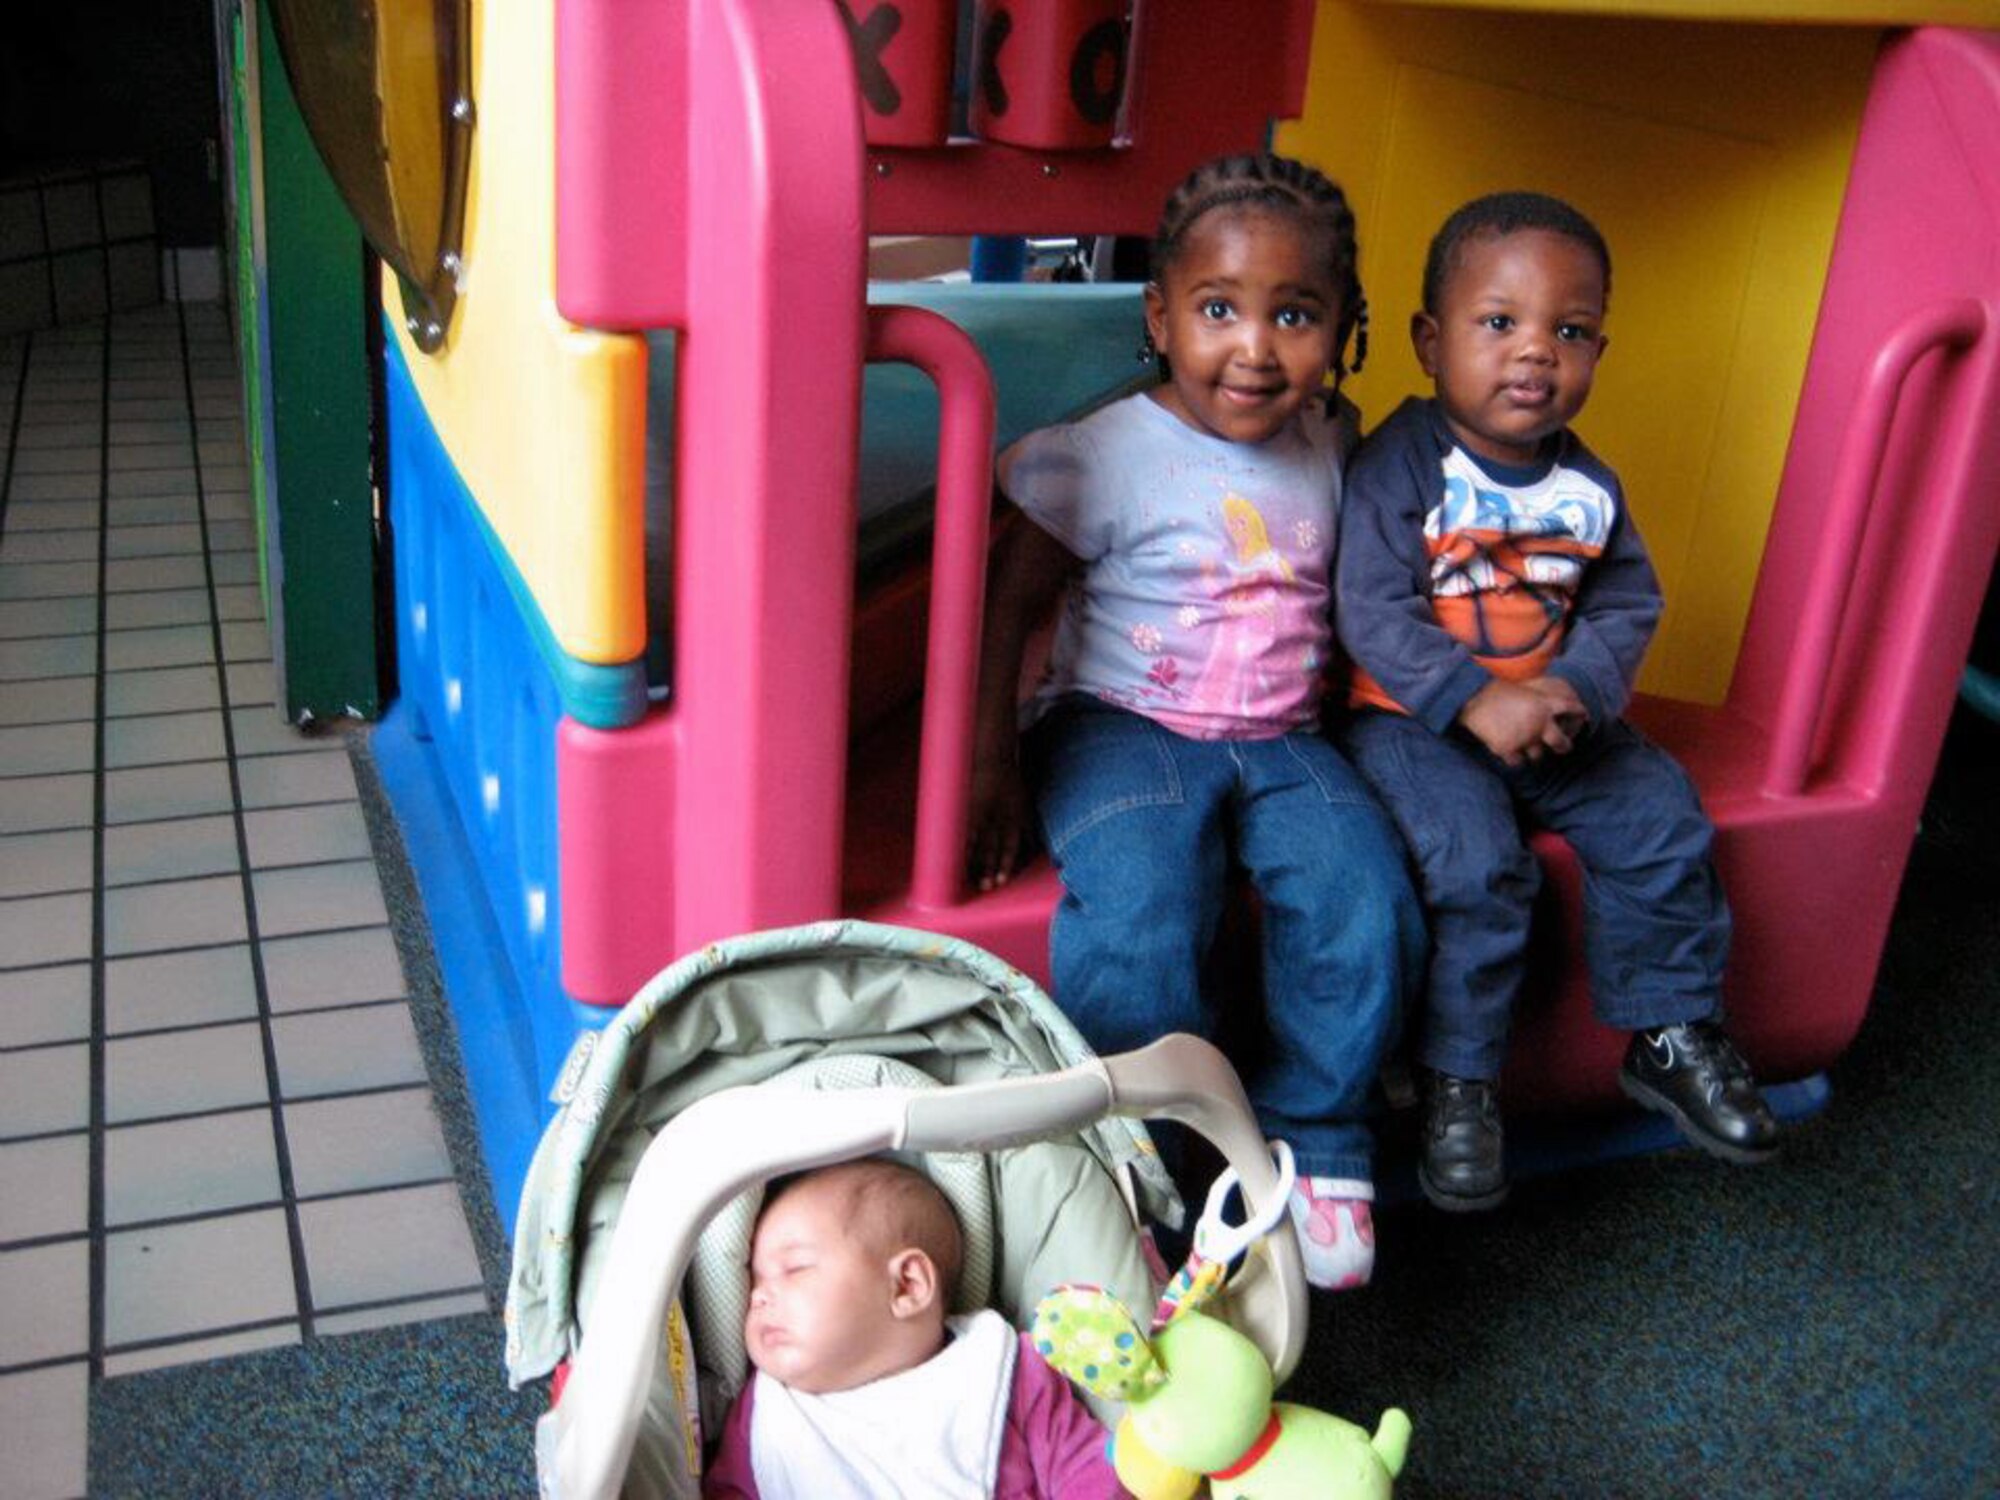 Lenny, age 1; Nya, age 3, and baby Kimmie, at age 3-months, play together during their first visit together after being separated, near Eglin Air Force Base, Florida. Initially, the siblings were placed in separate foster homes in different towns. Social workers facilitated monthly visits. (Courtesy photo)